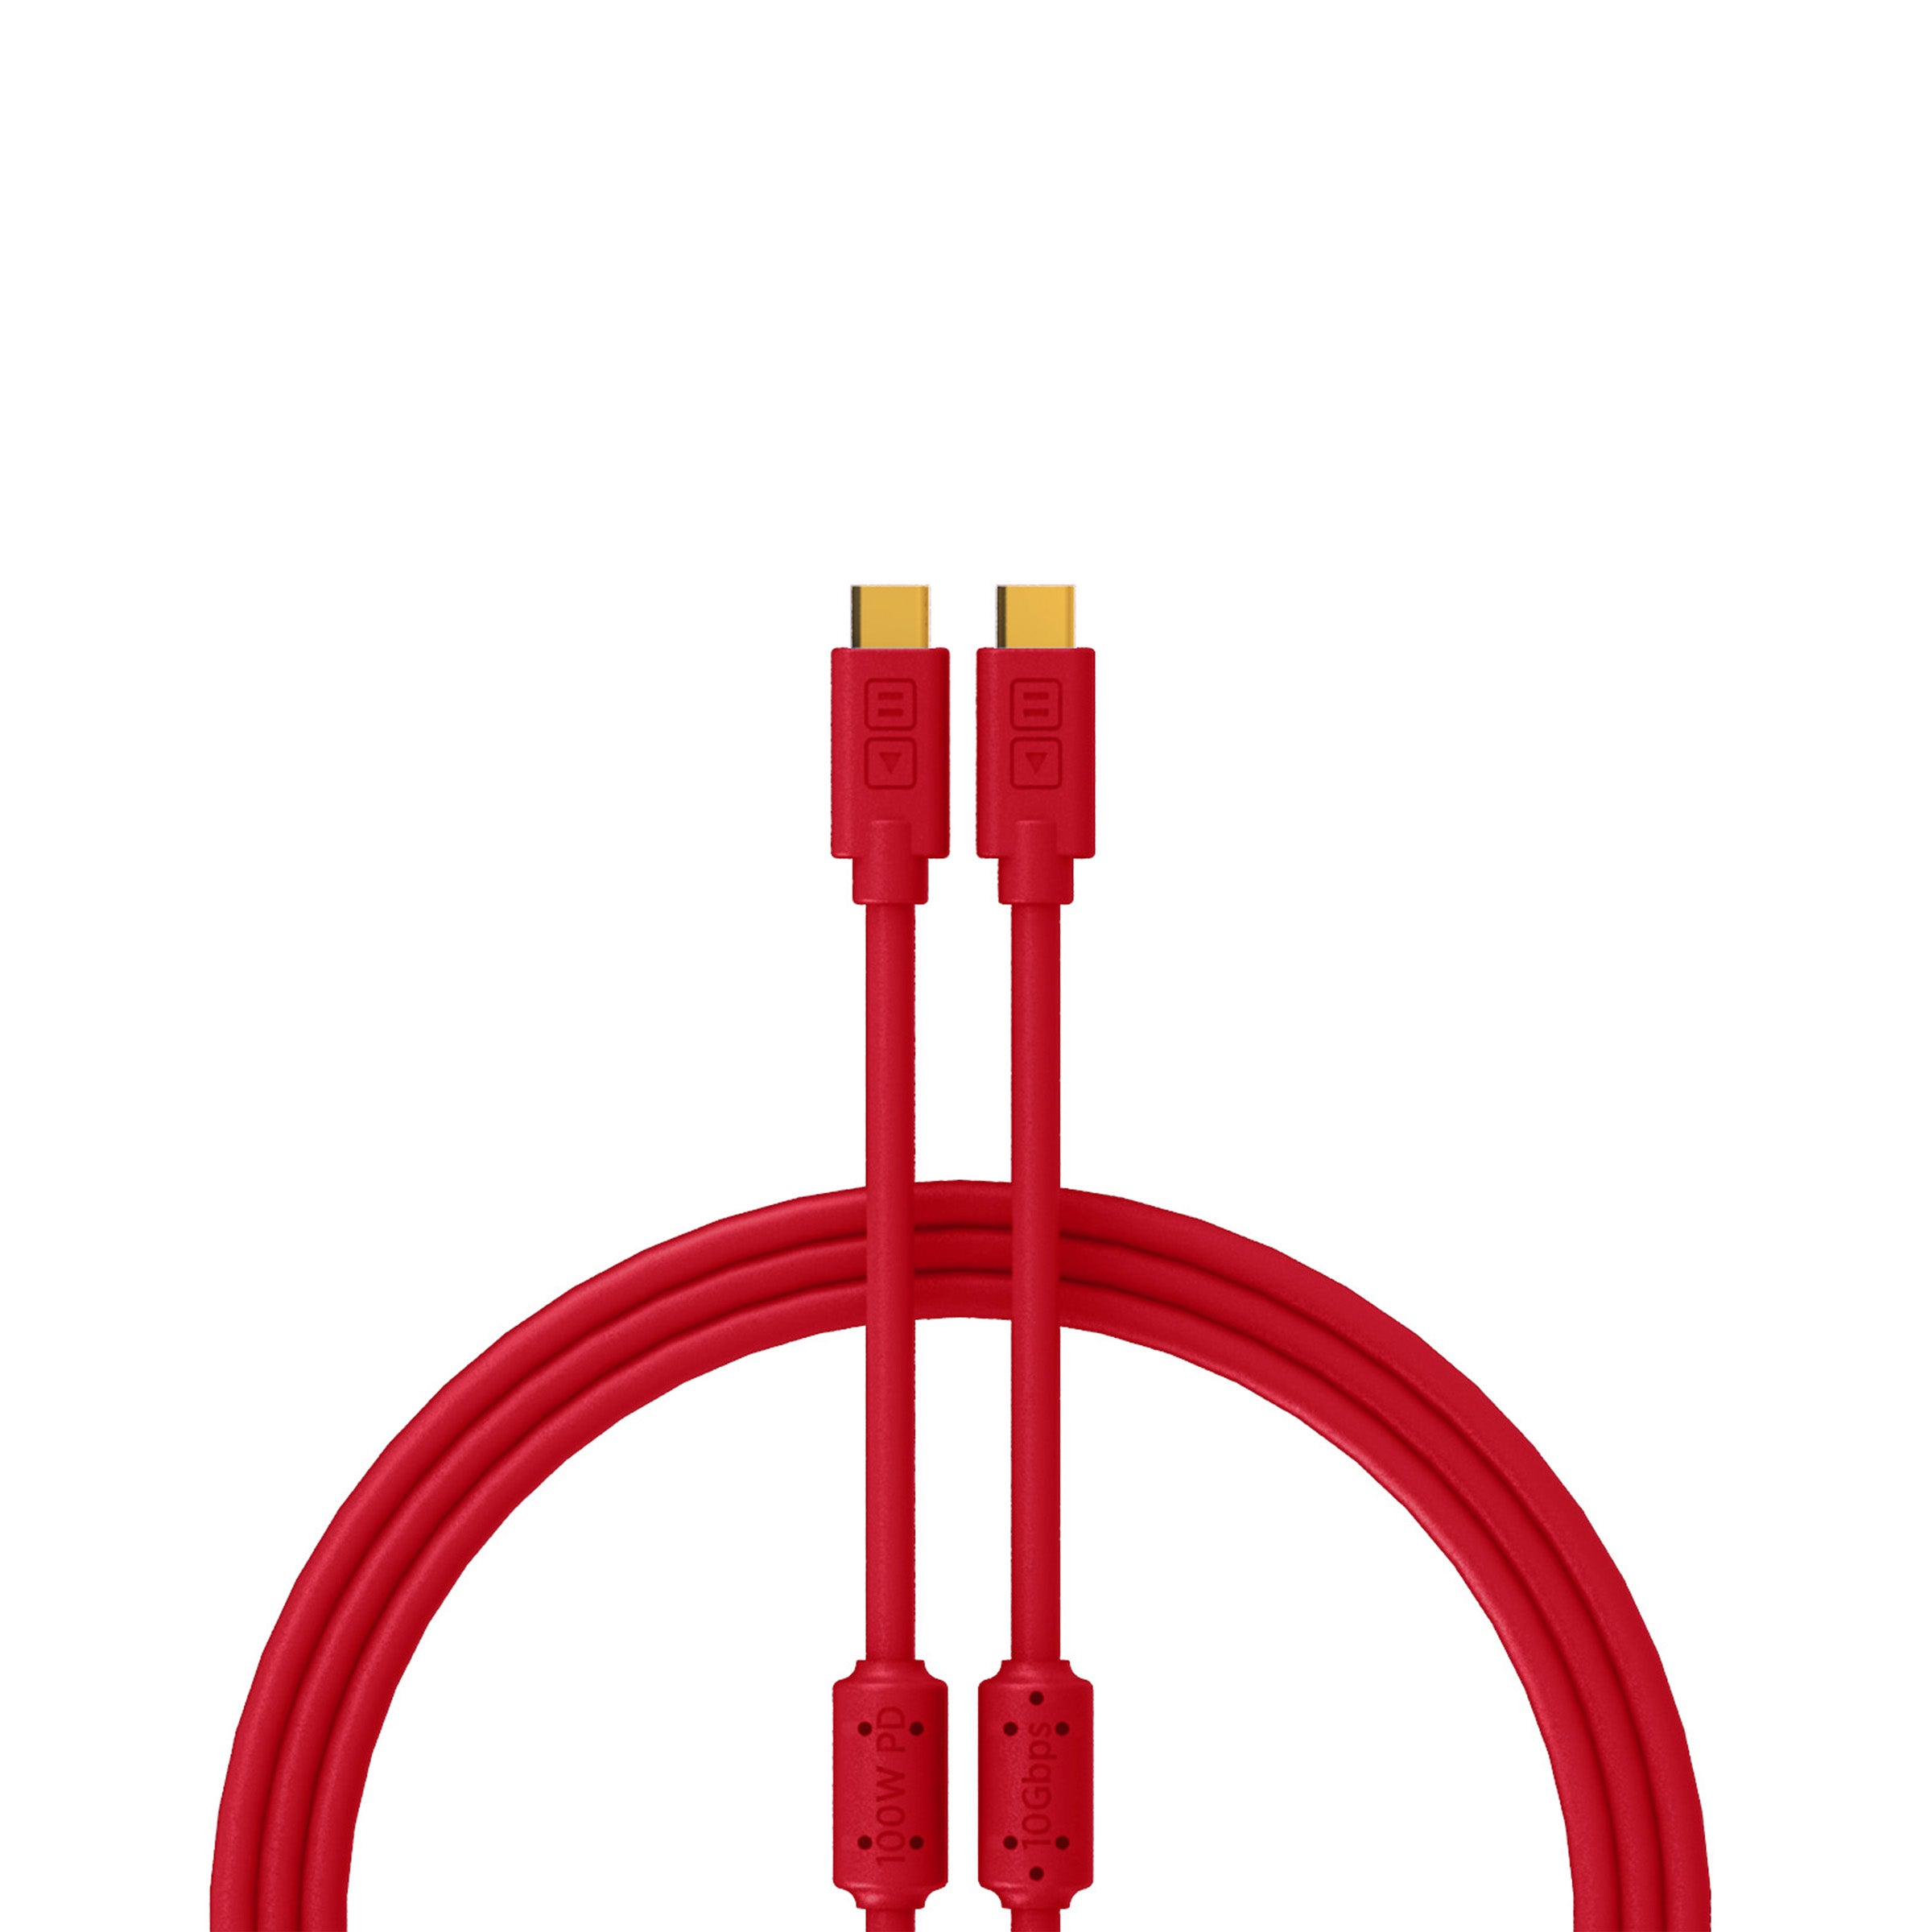 DJ TechTools Chroma Cables USB-C to C 1.5m - Red